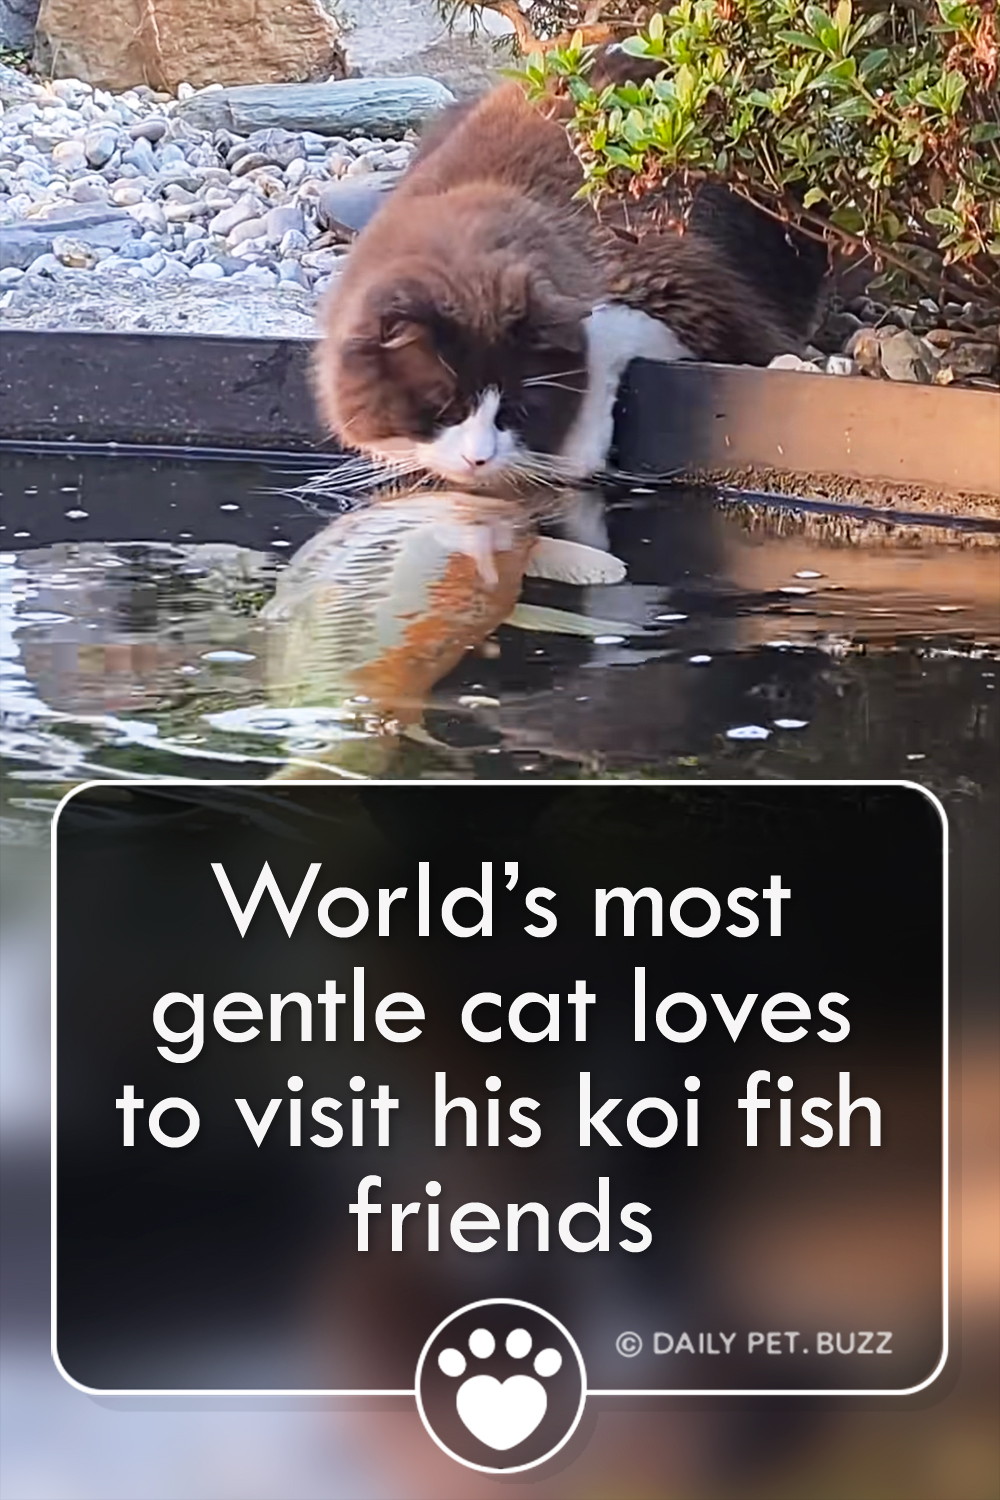 World’s most gentle cat loves to visit his koi fish friends